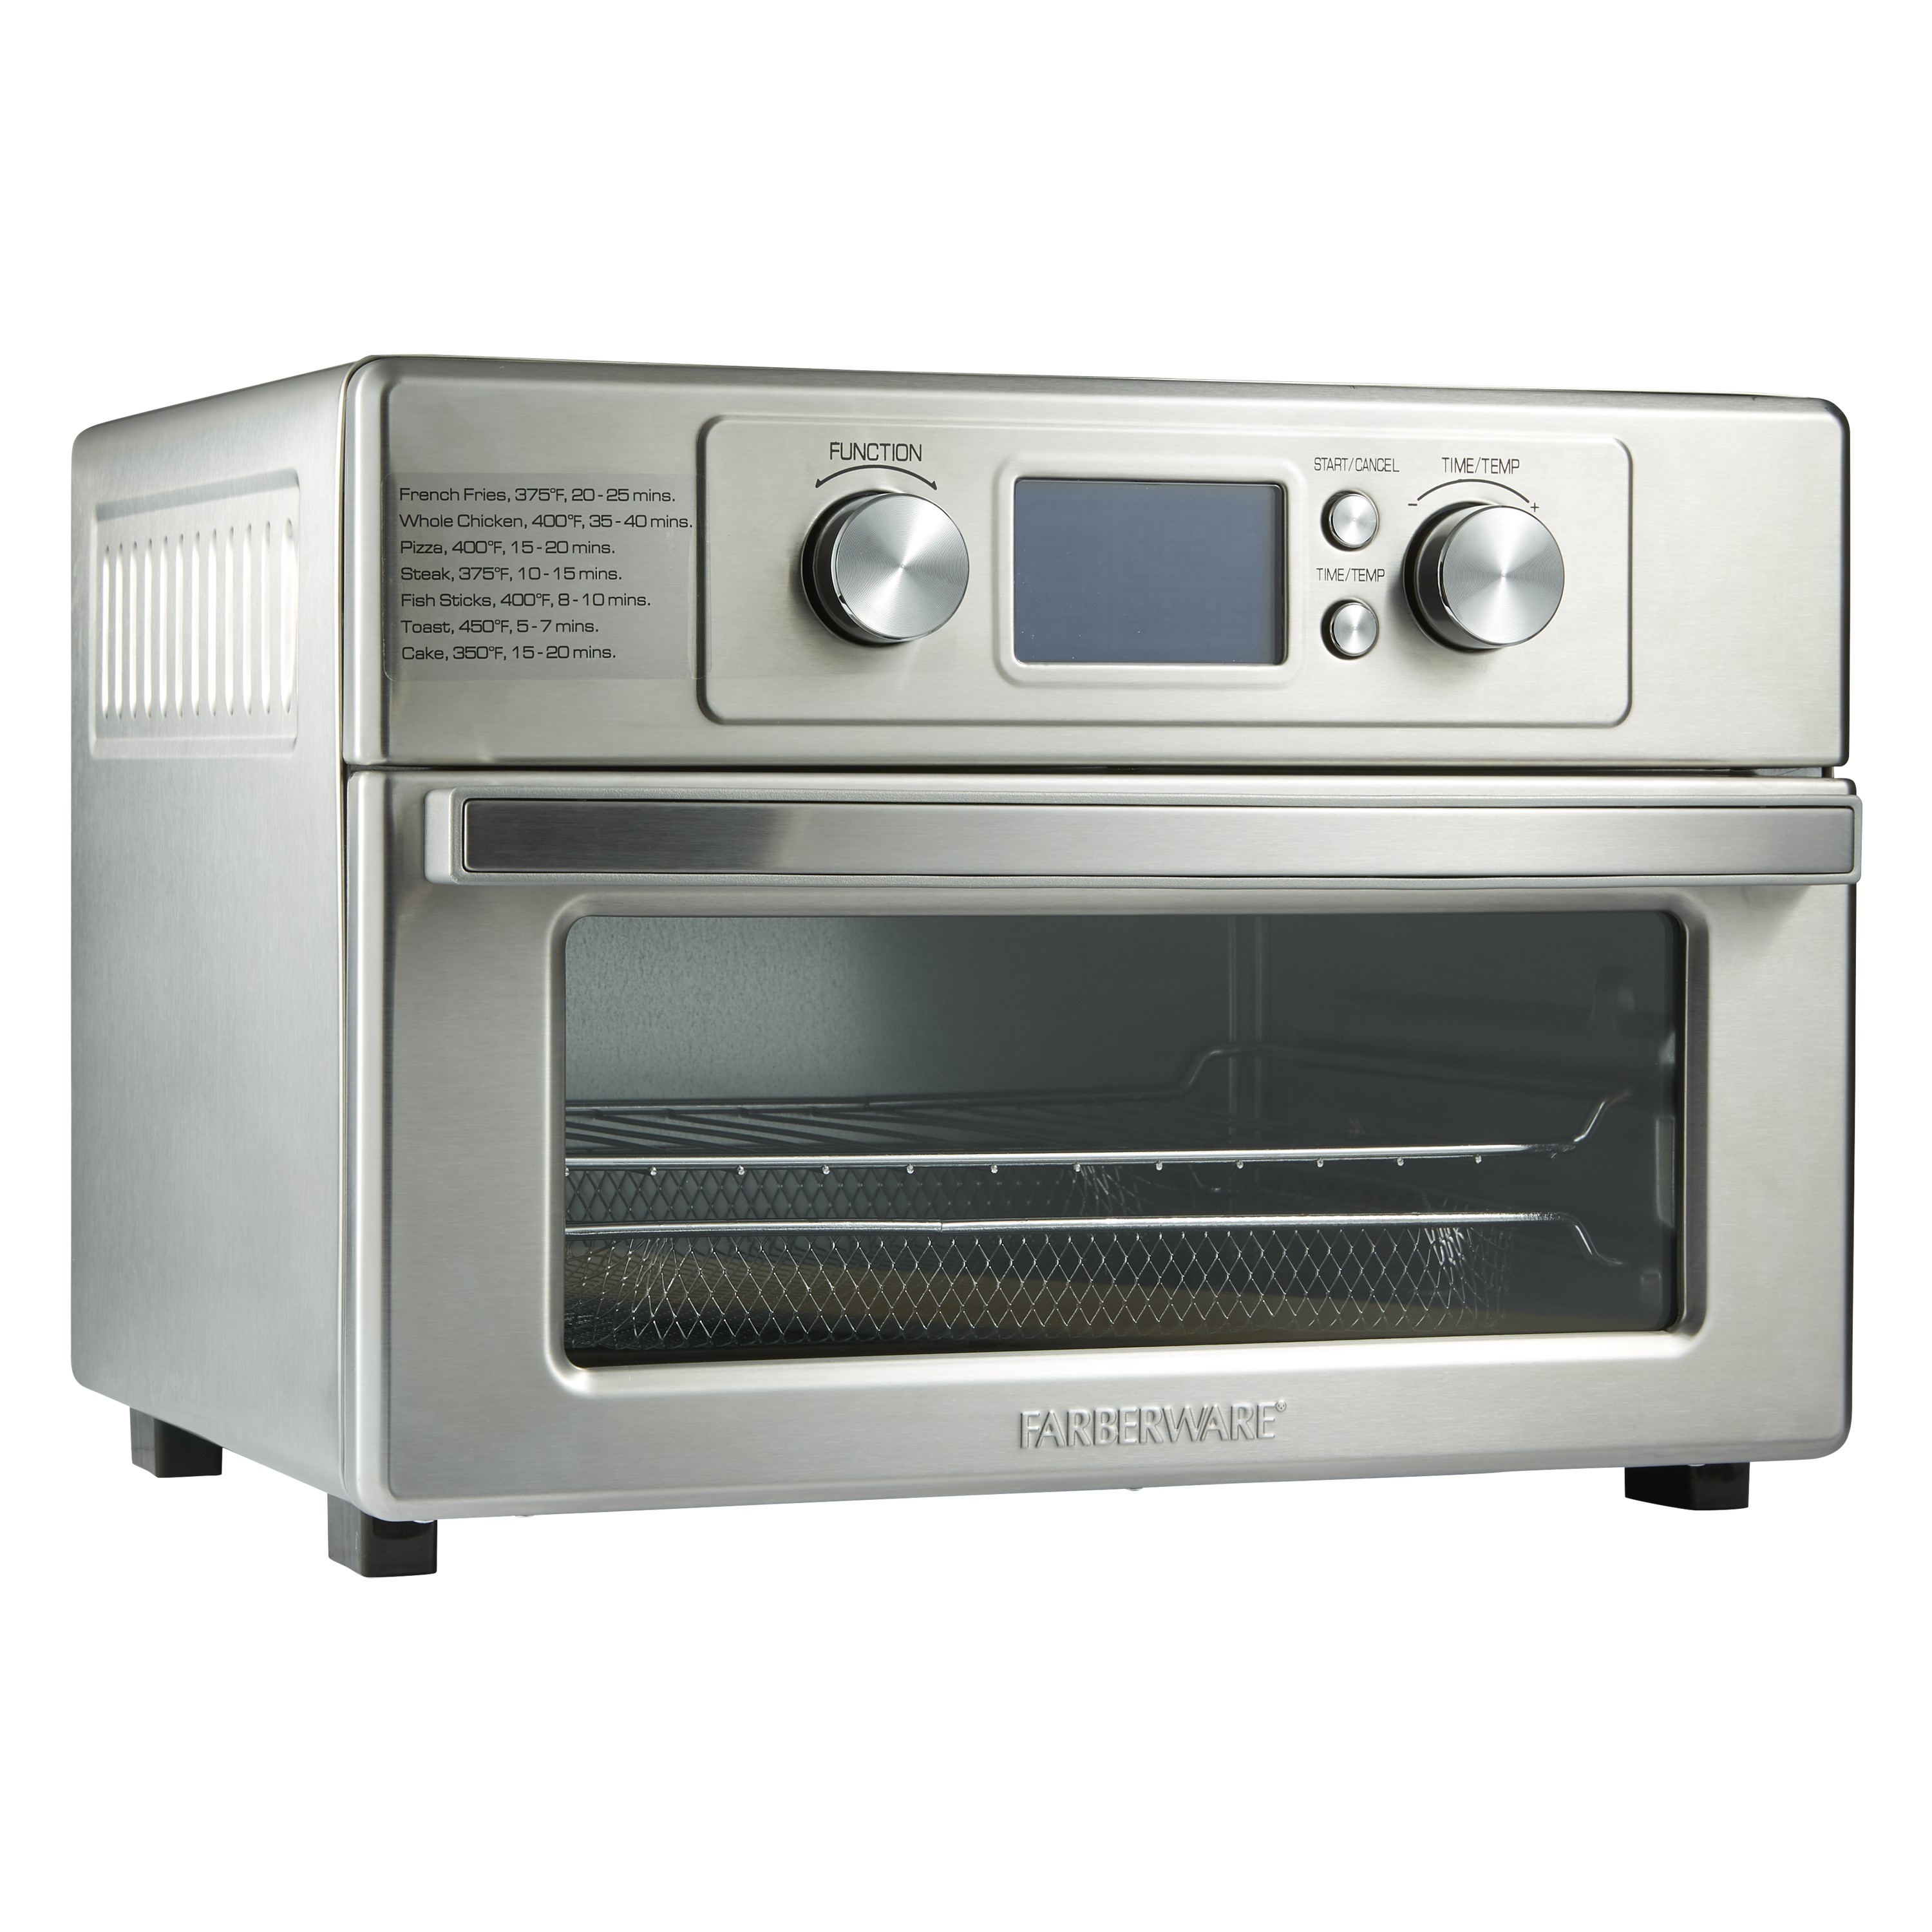 Farberware Air Fryer Toaster Oven, Stainless Steel, Countertop, New - image 1 of 8